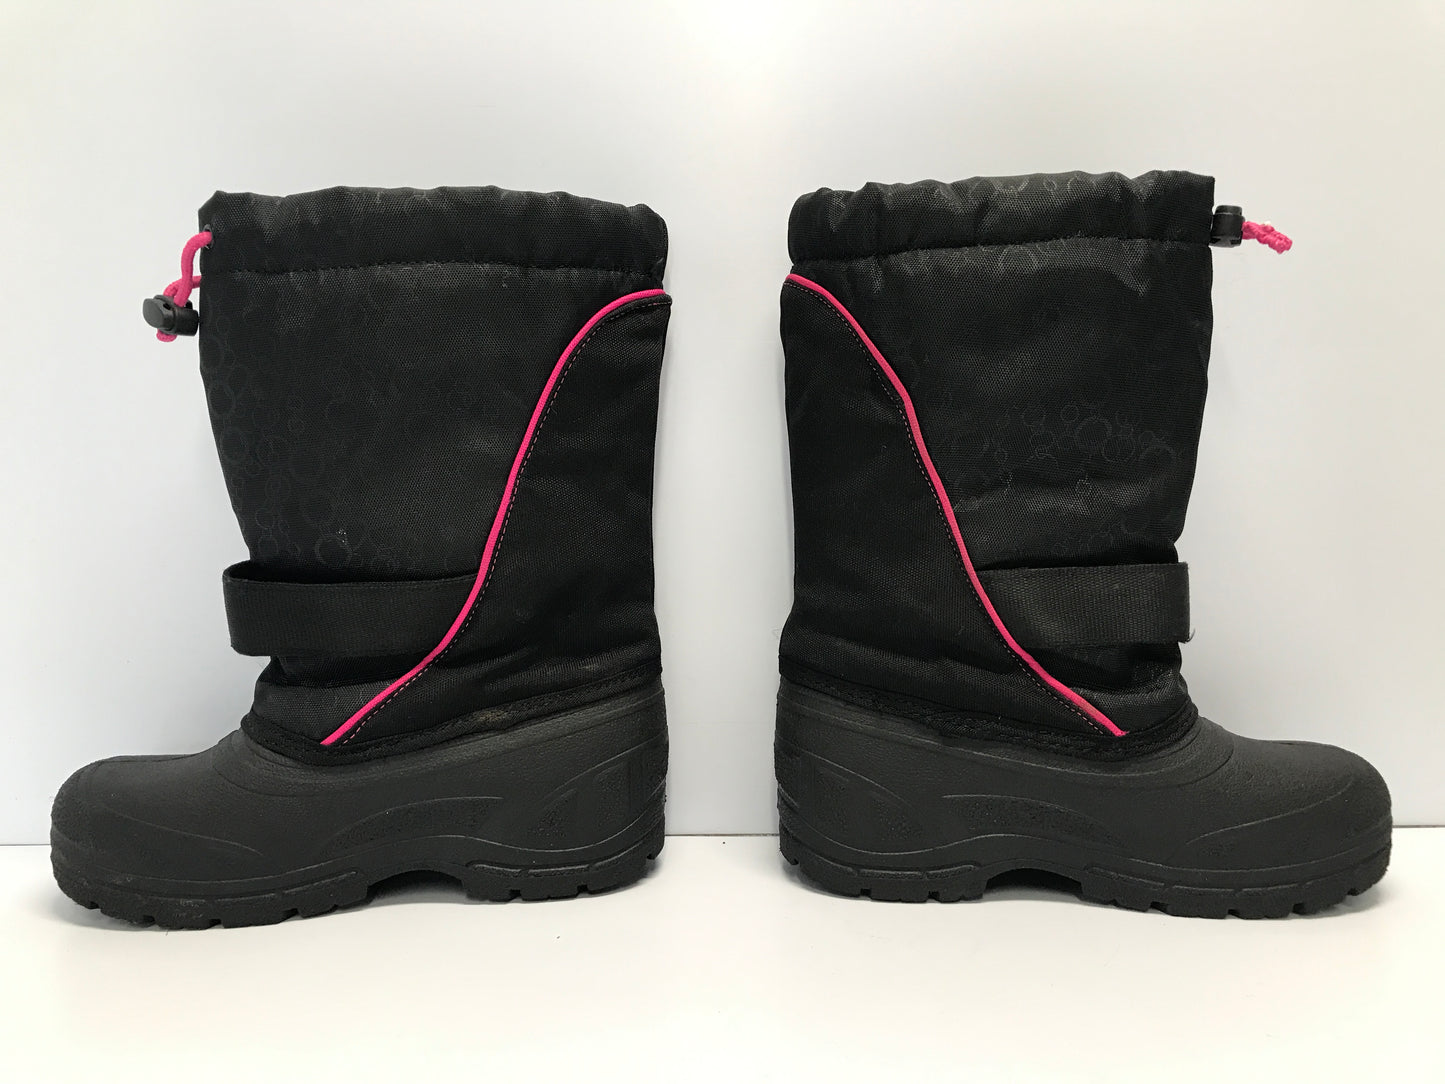 Winter Boots Child Size 3 Canadian Waterproof  Black Pink With Liner Excellent